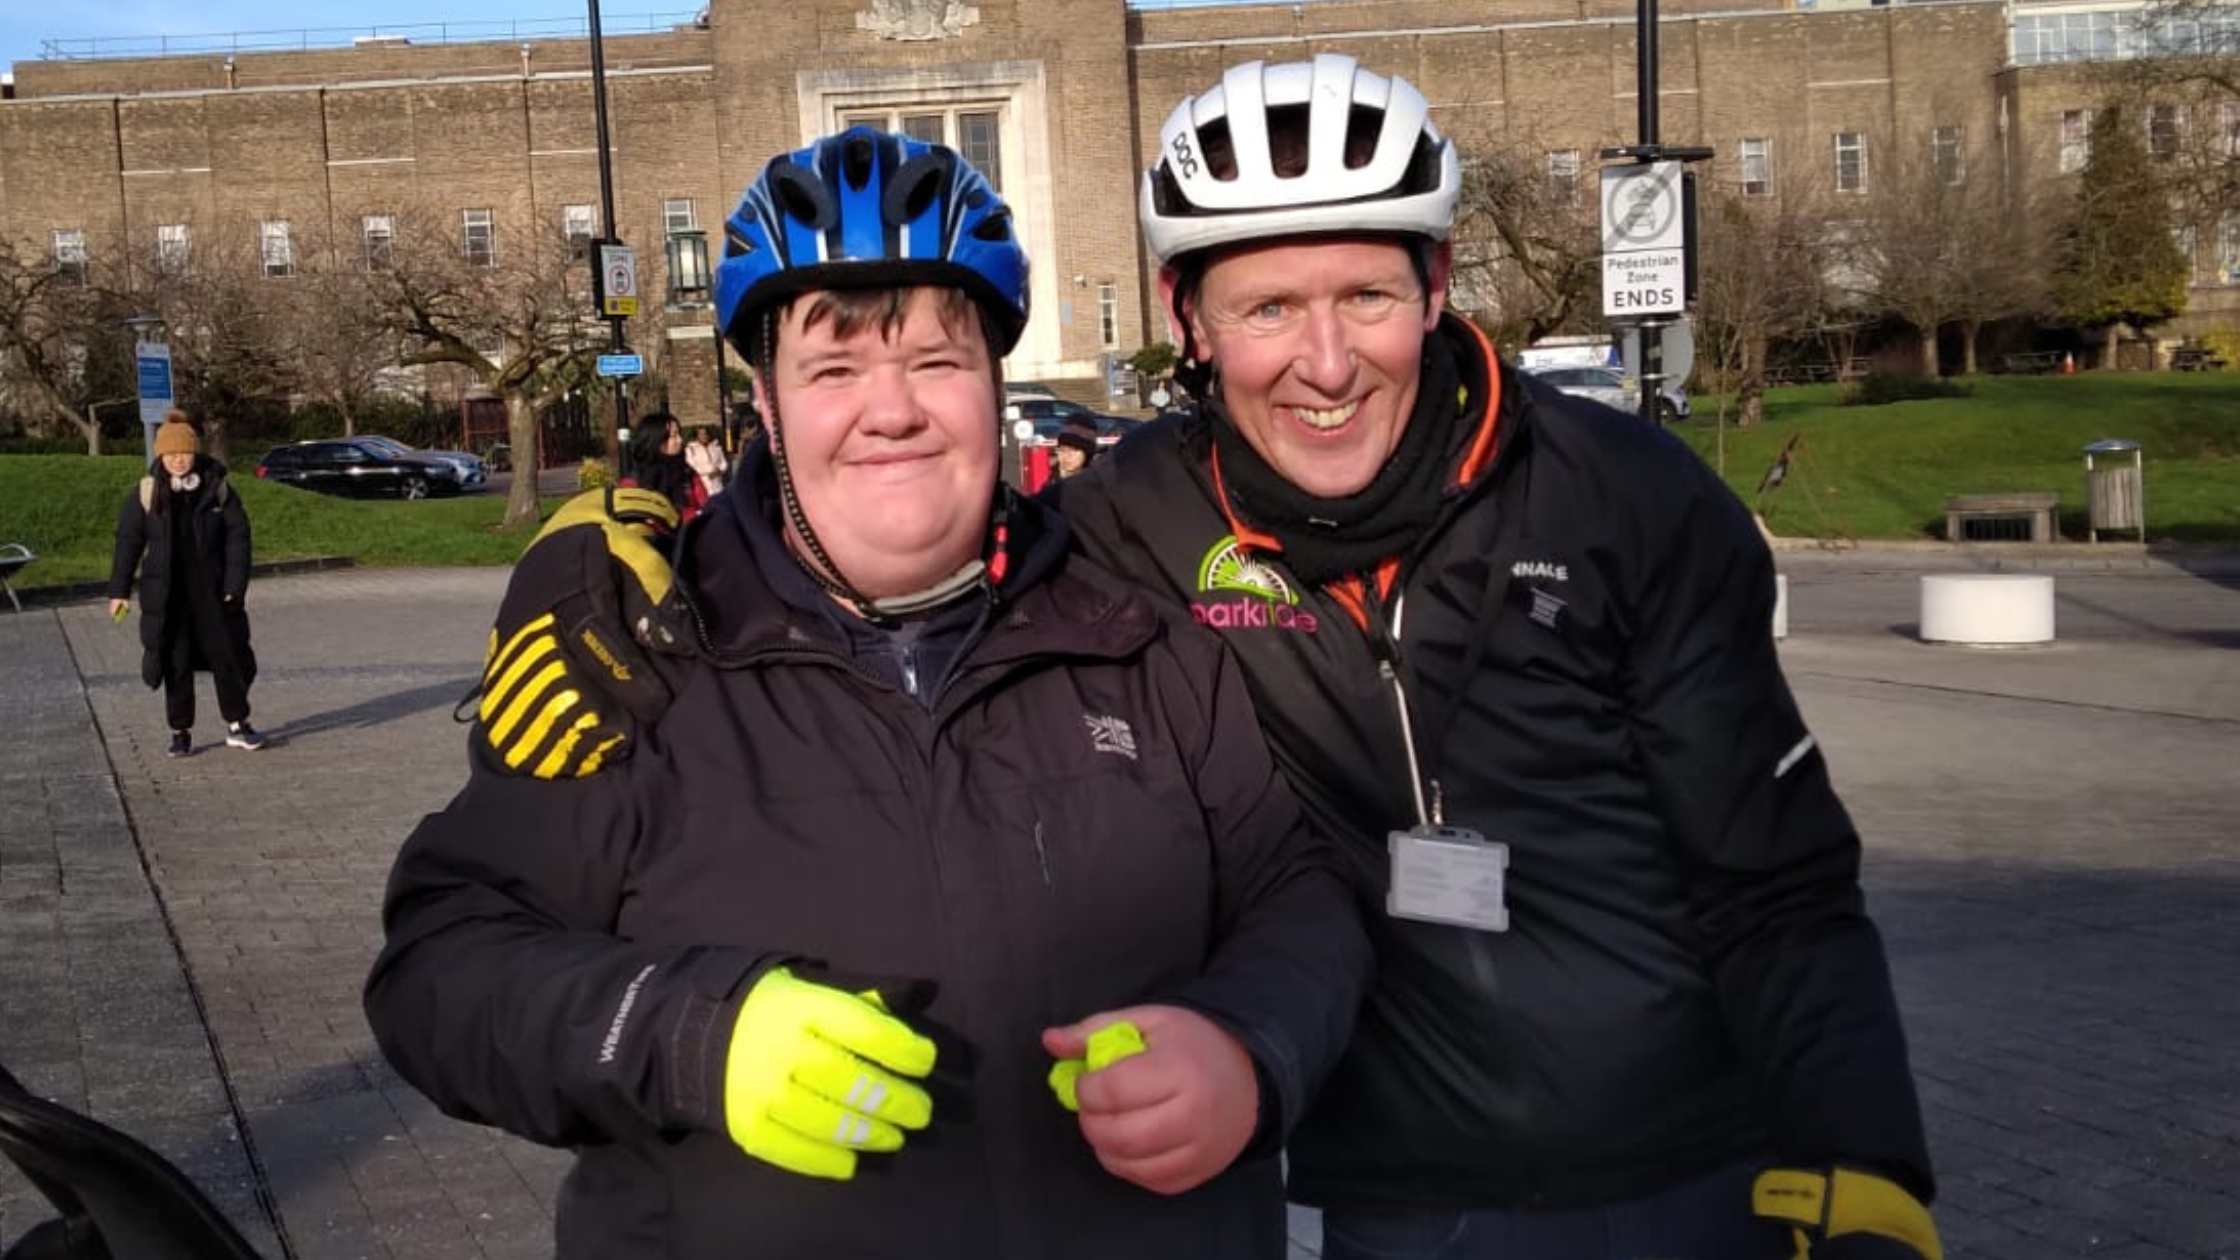 The image shows two cyclists, likely friends, standing together outside on what appears to be a university campus or similar institutional setting with brick buildings in the background. They are dressed in cycling gear, wearing helmets and reflective jackets, suggesting they have been out for a bike ride. Both individuals have big smiles on their faces, conveying a sense of joy and camaraderie. The scene captures the enjoyment of participating in outdoor recreational activities together.